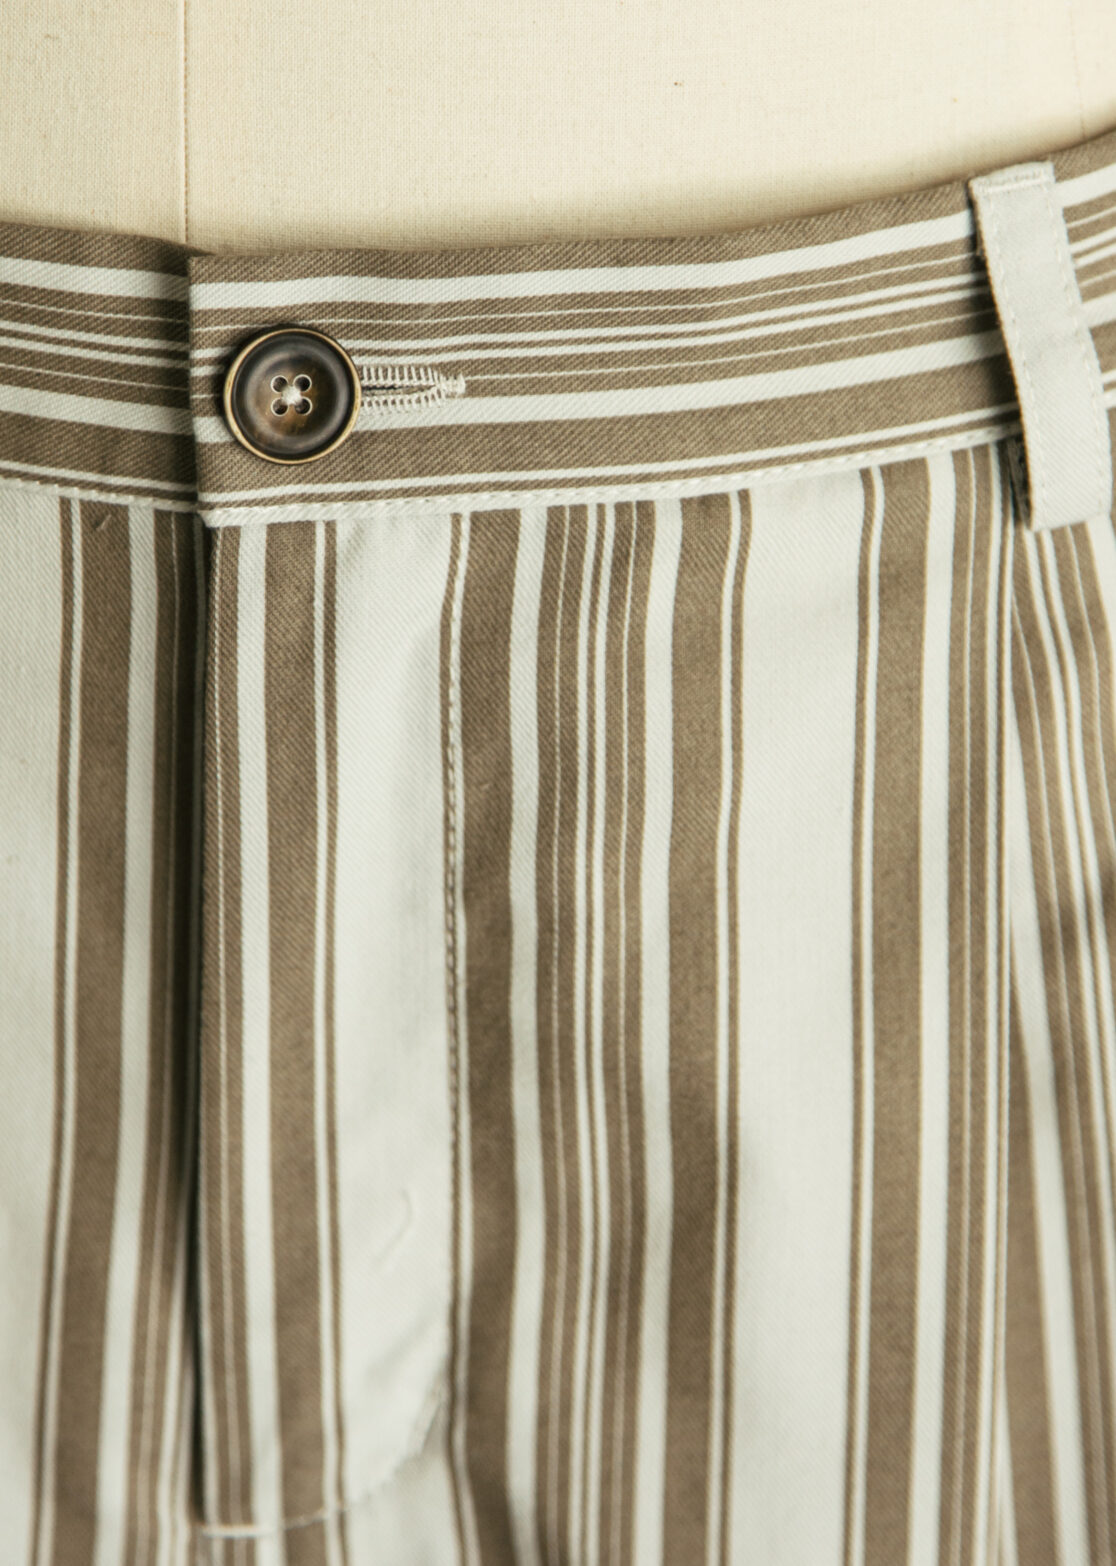 NEW IN - Men - Mahorka Striped Image Secondary